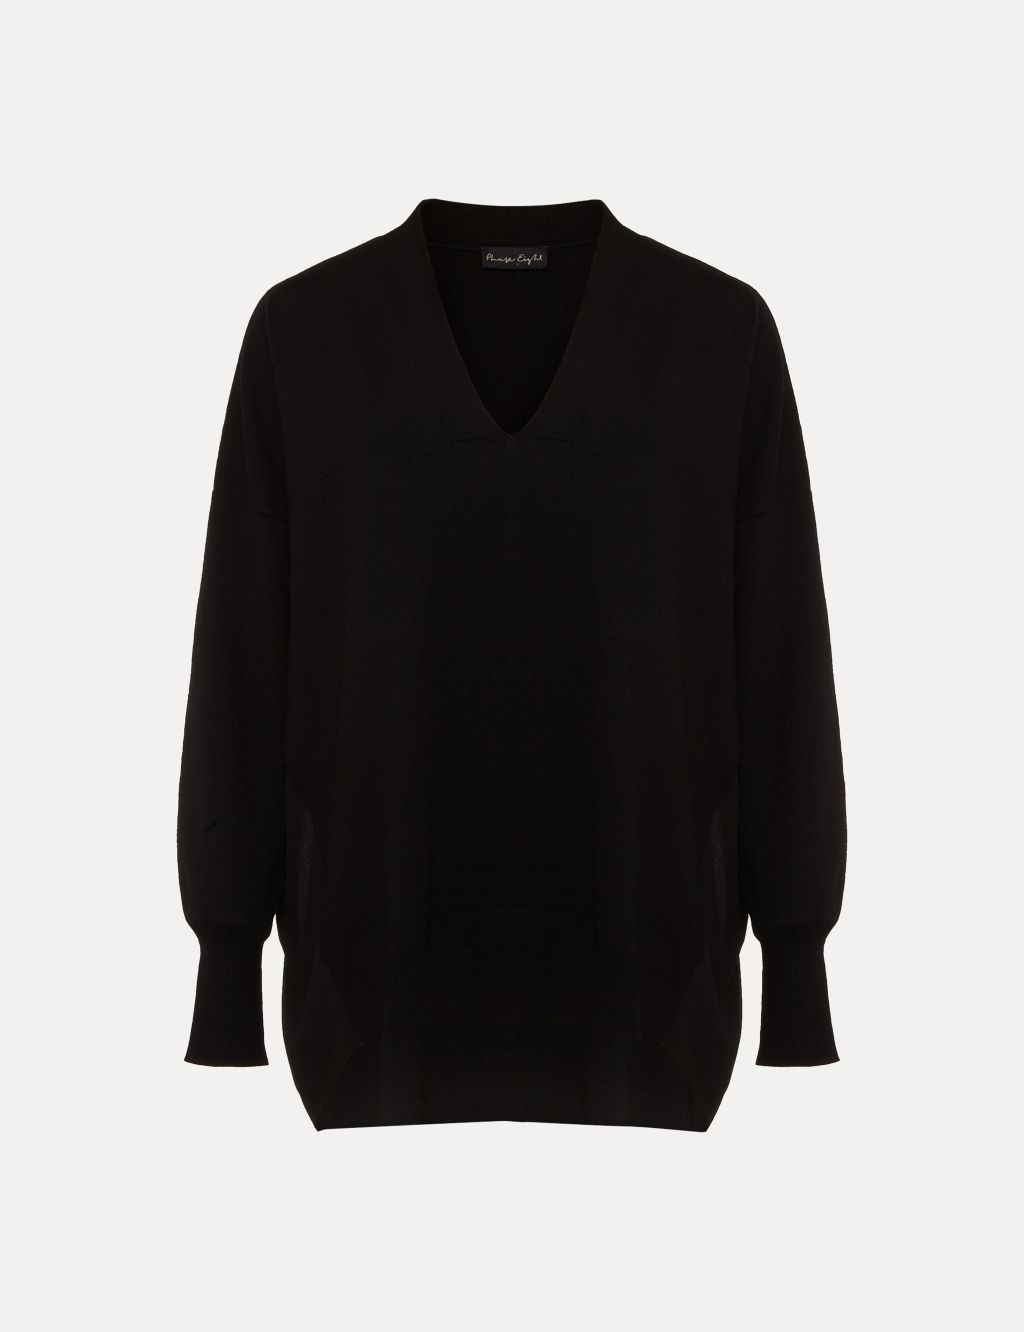 V-Neck Shirt Knitted Top | Phase Eight | M&S